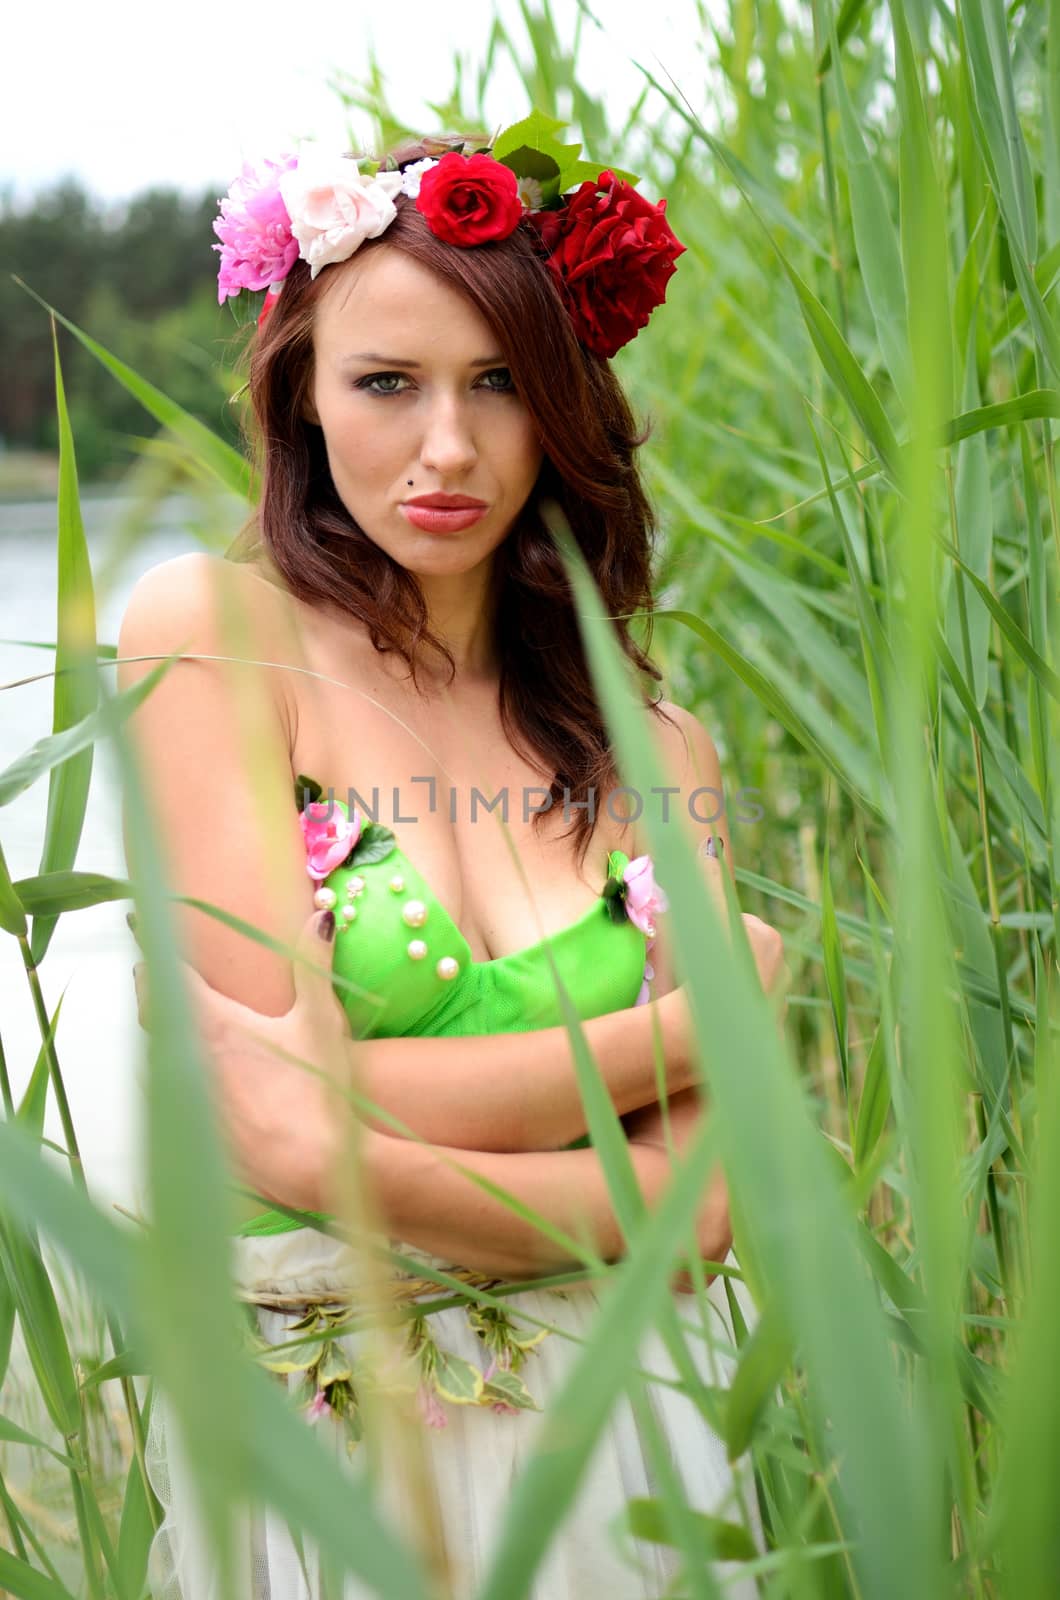 Portrait of female model with chestnut hairs, wearing wreath made of mixed flowers. Woman posing near lake surrounded by reeds.  